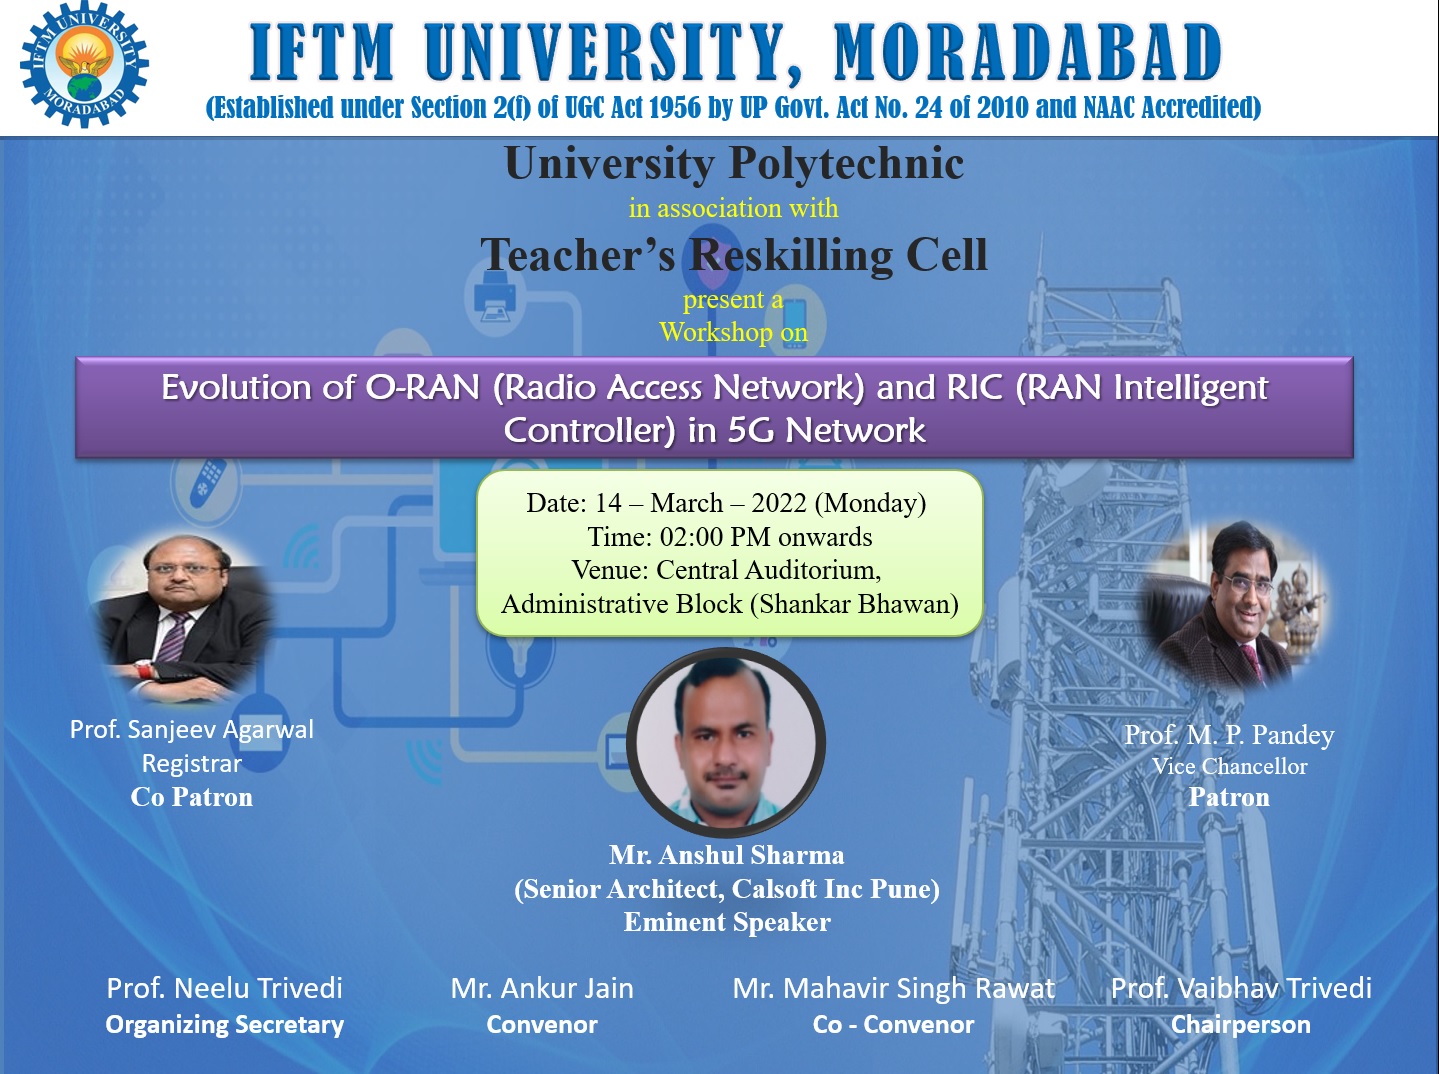 Workshop on Evolution of O-RAN (Radio Access Network) and RIC (RAN Intelligent Controller) in 5G Network